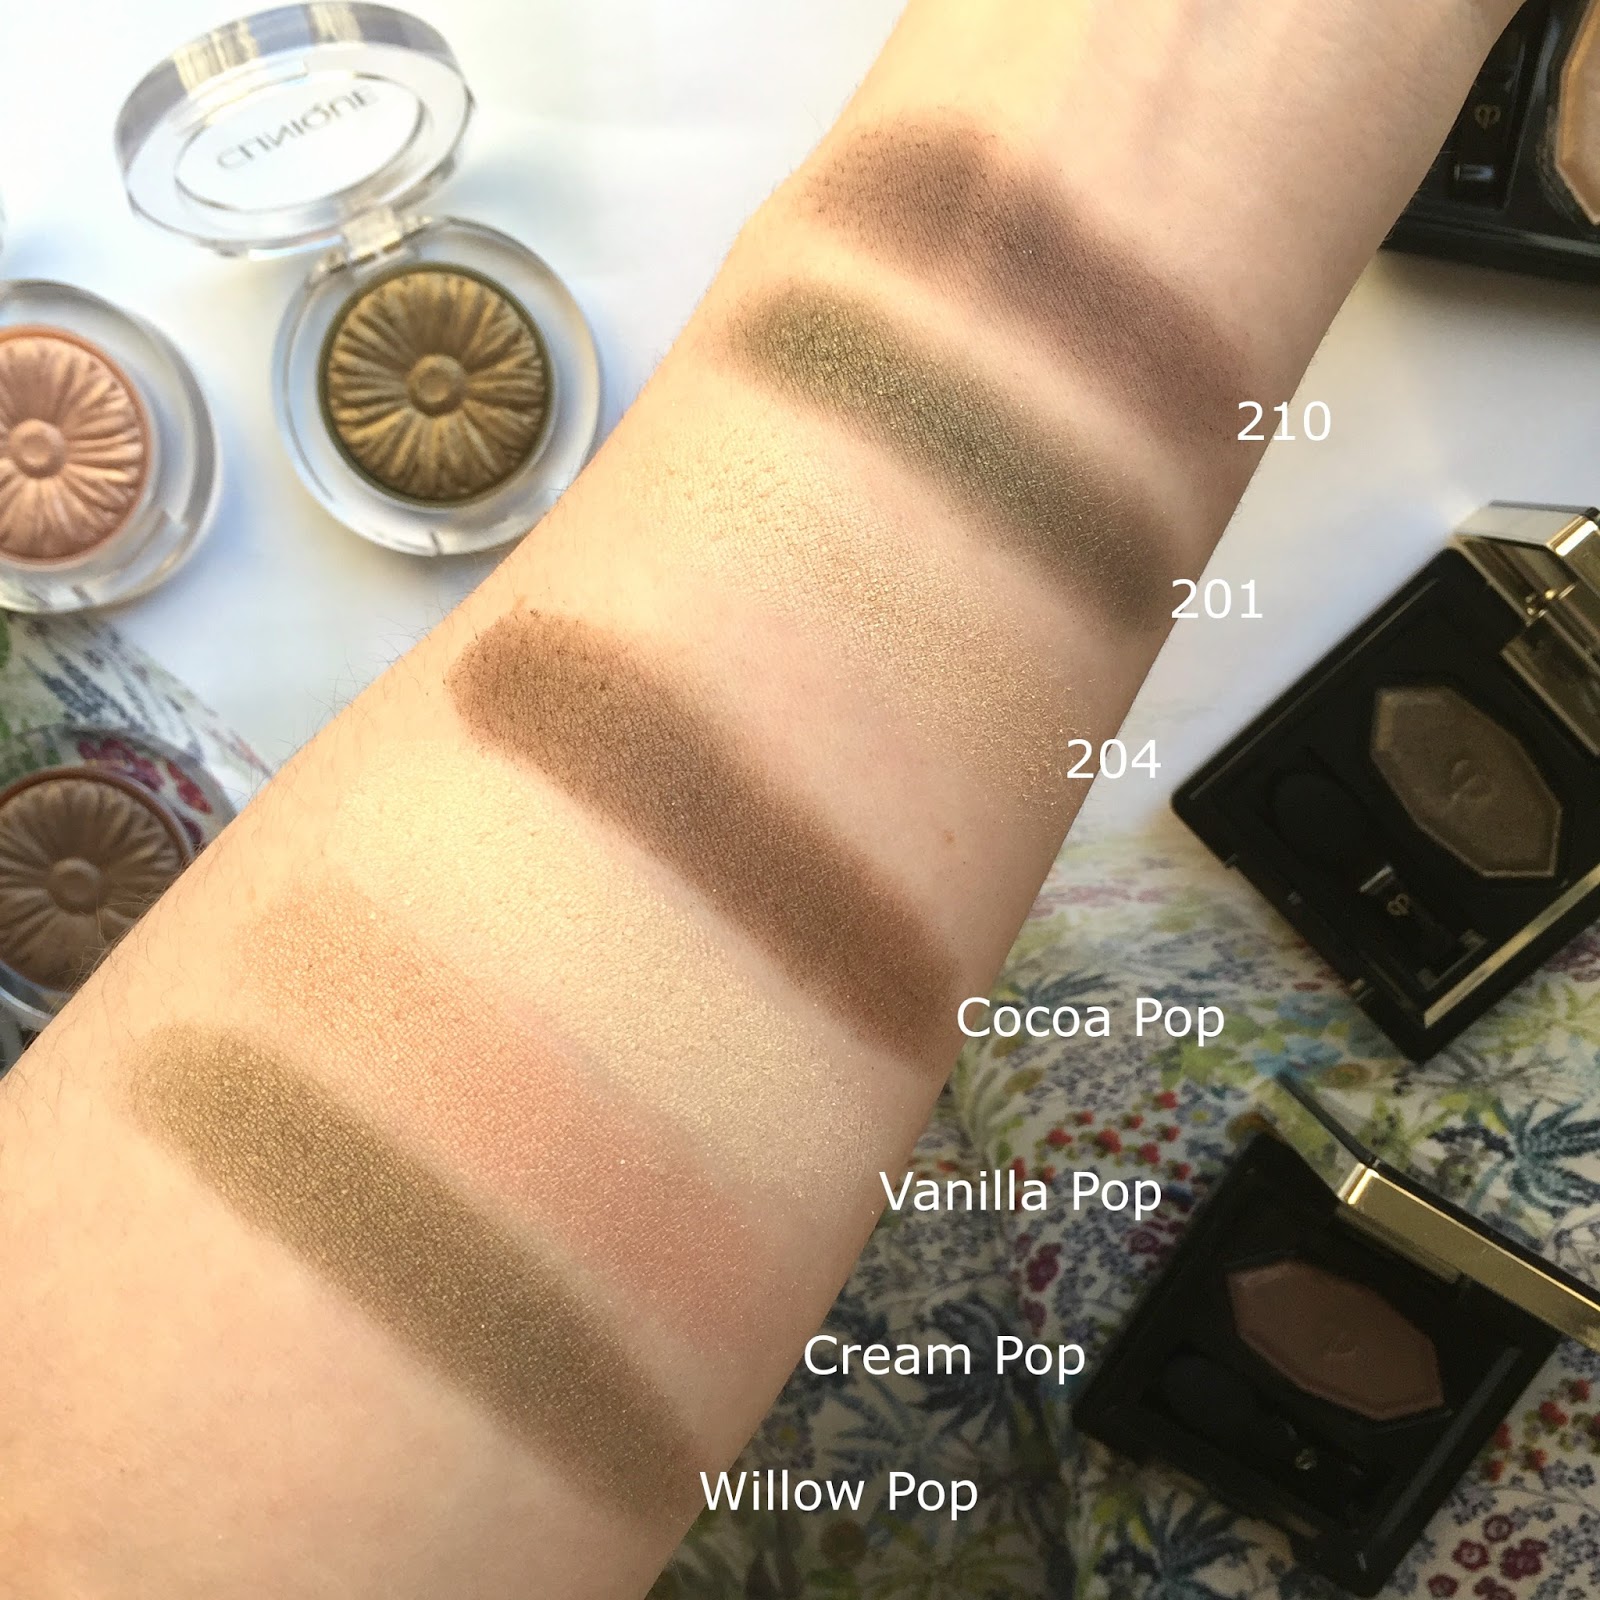 reparatøren Moralsk Mos New Solo Shadows To Try From Clinique and Cle de Peau Beaute | alittlebitetc